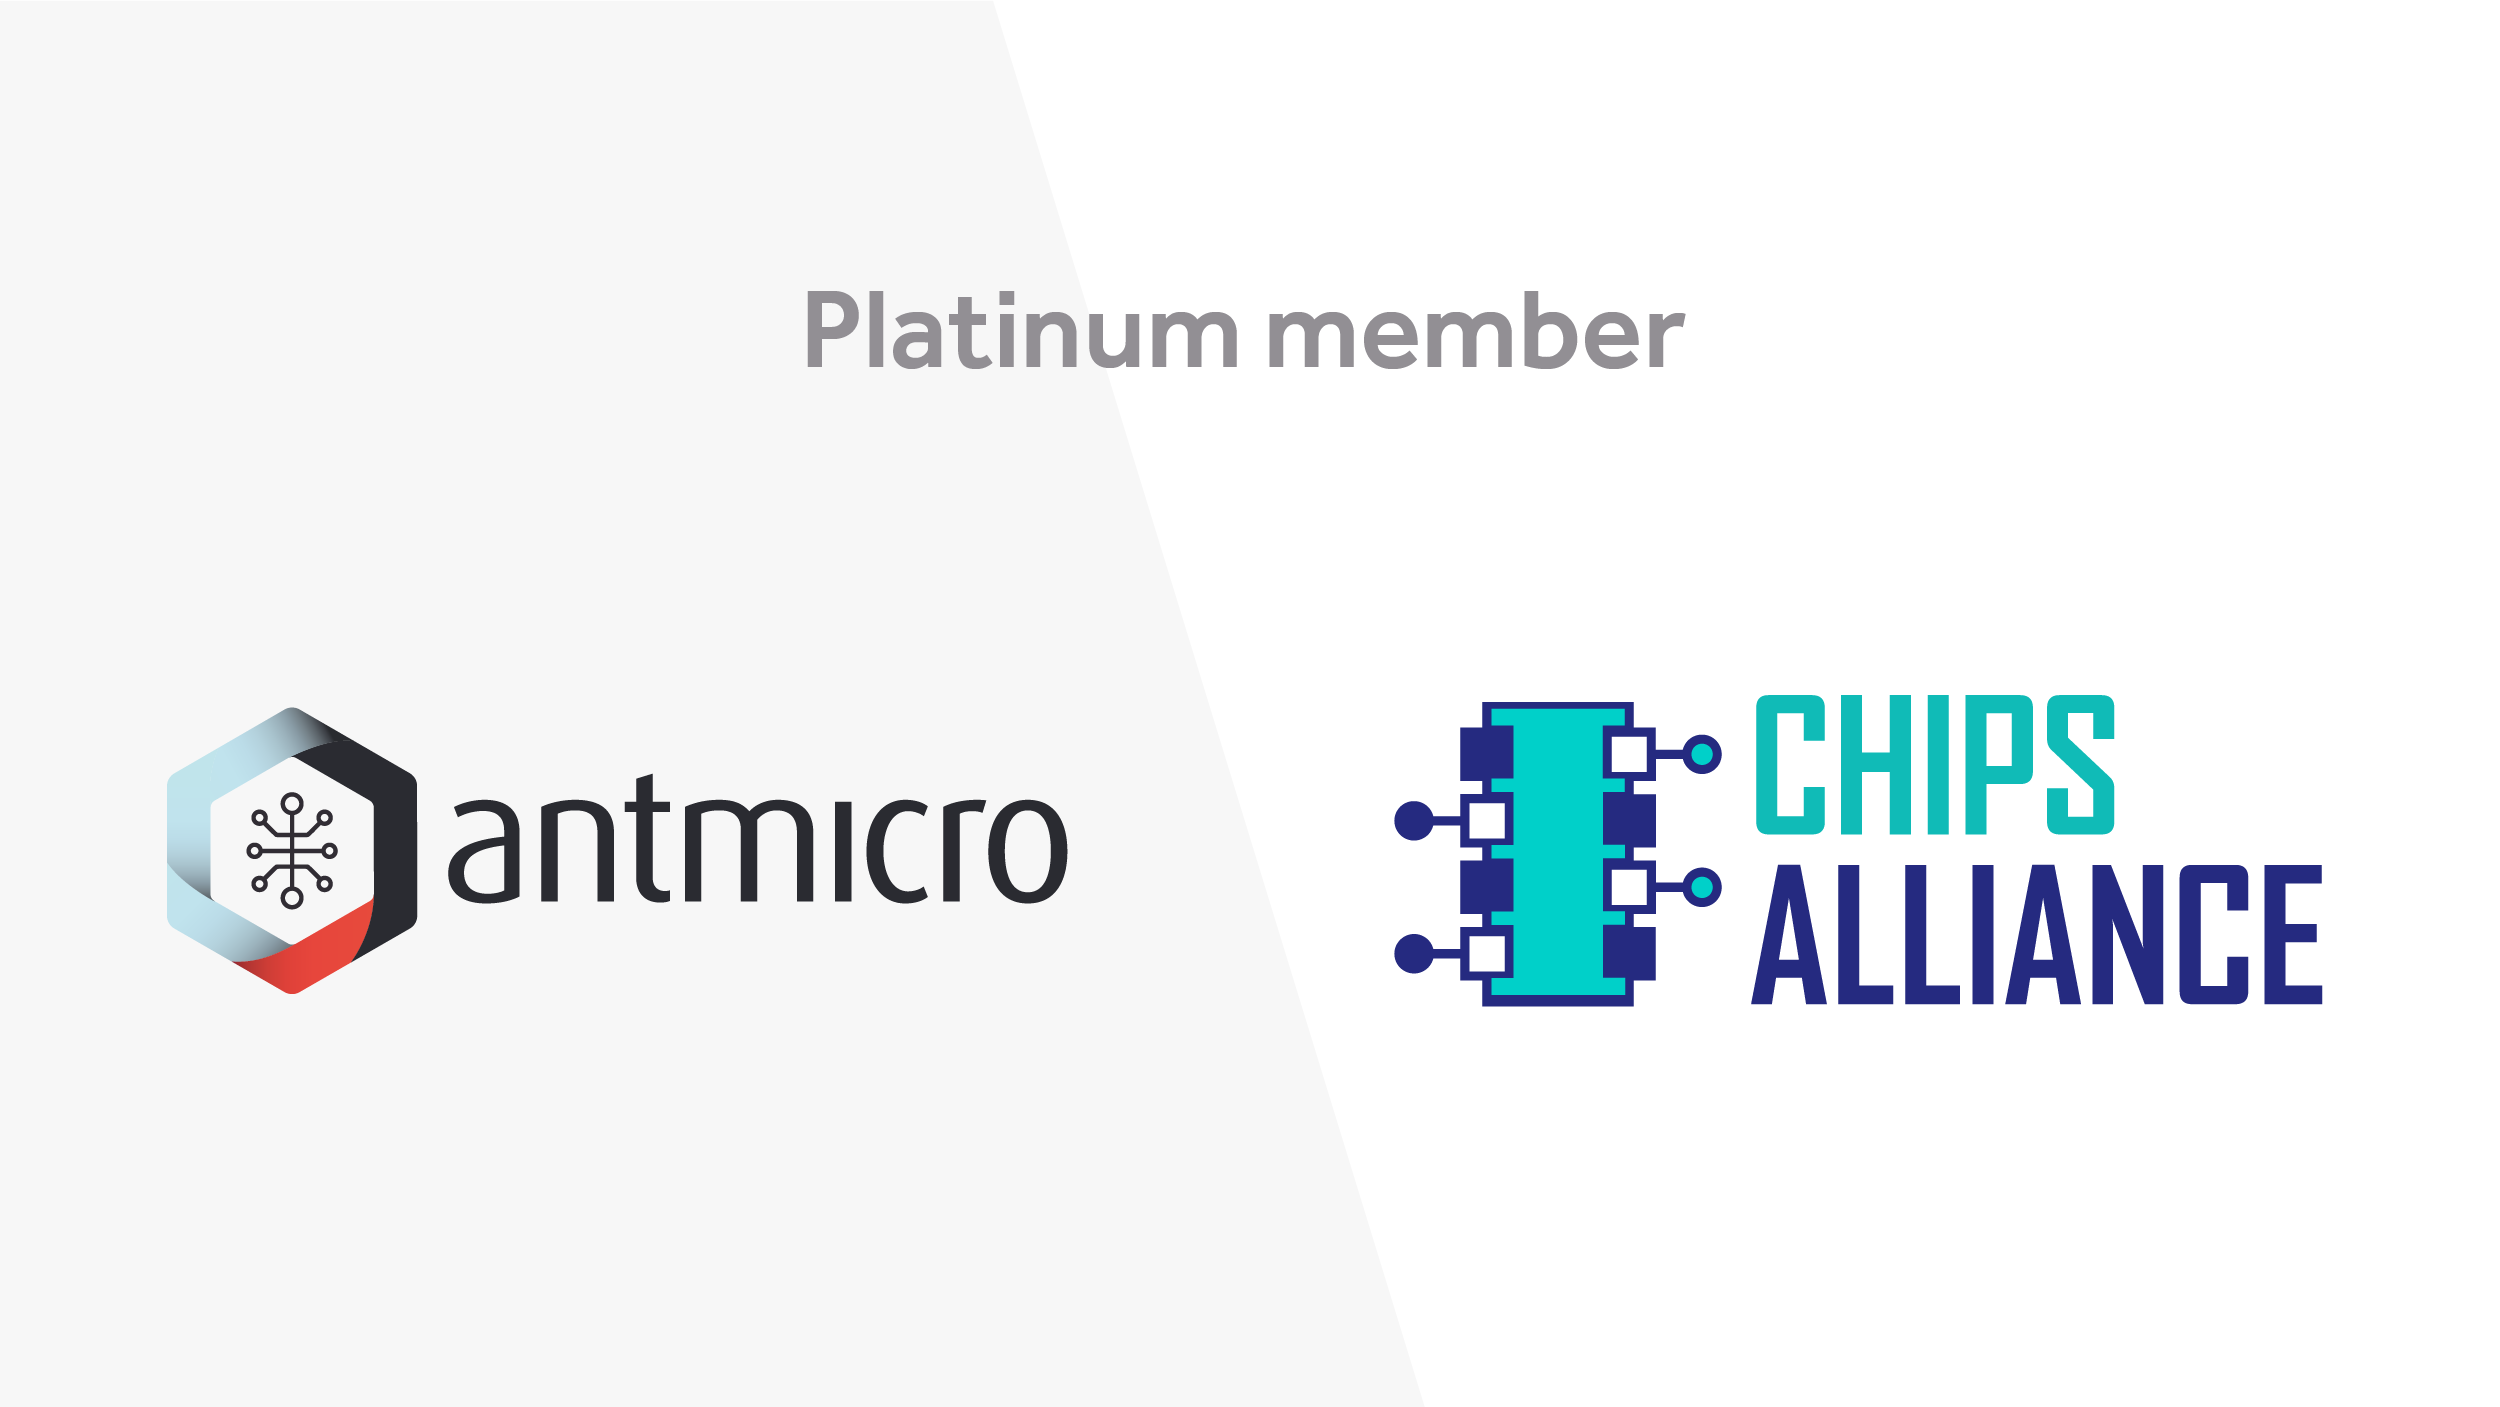 Antmicro and CHIPS Alliance logo